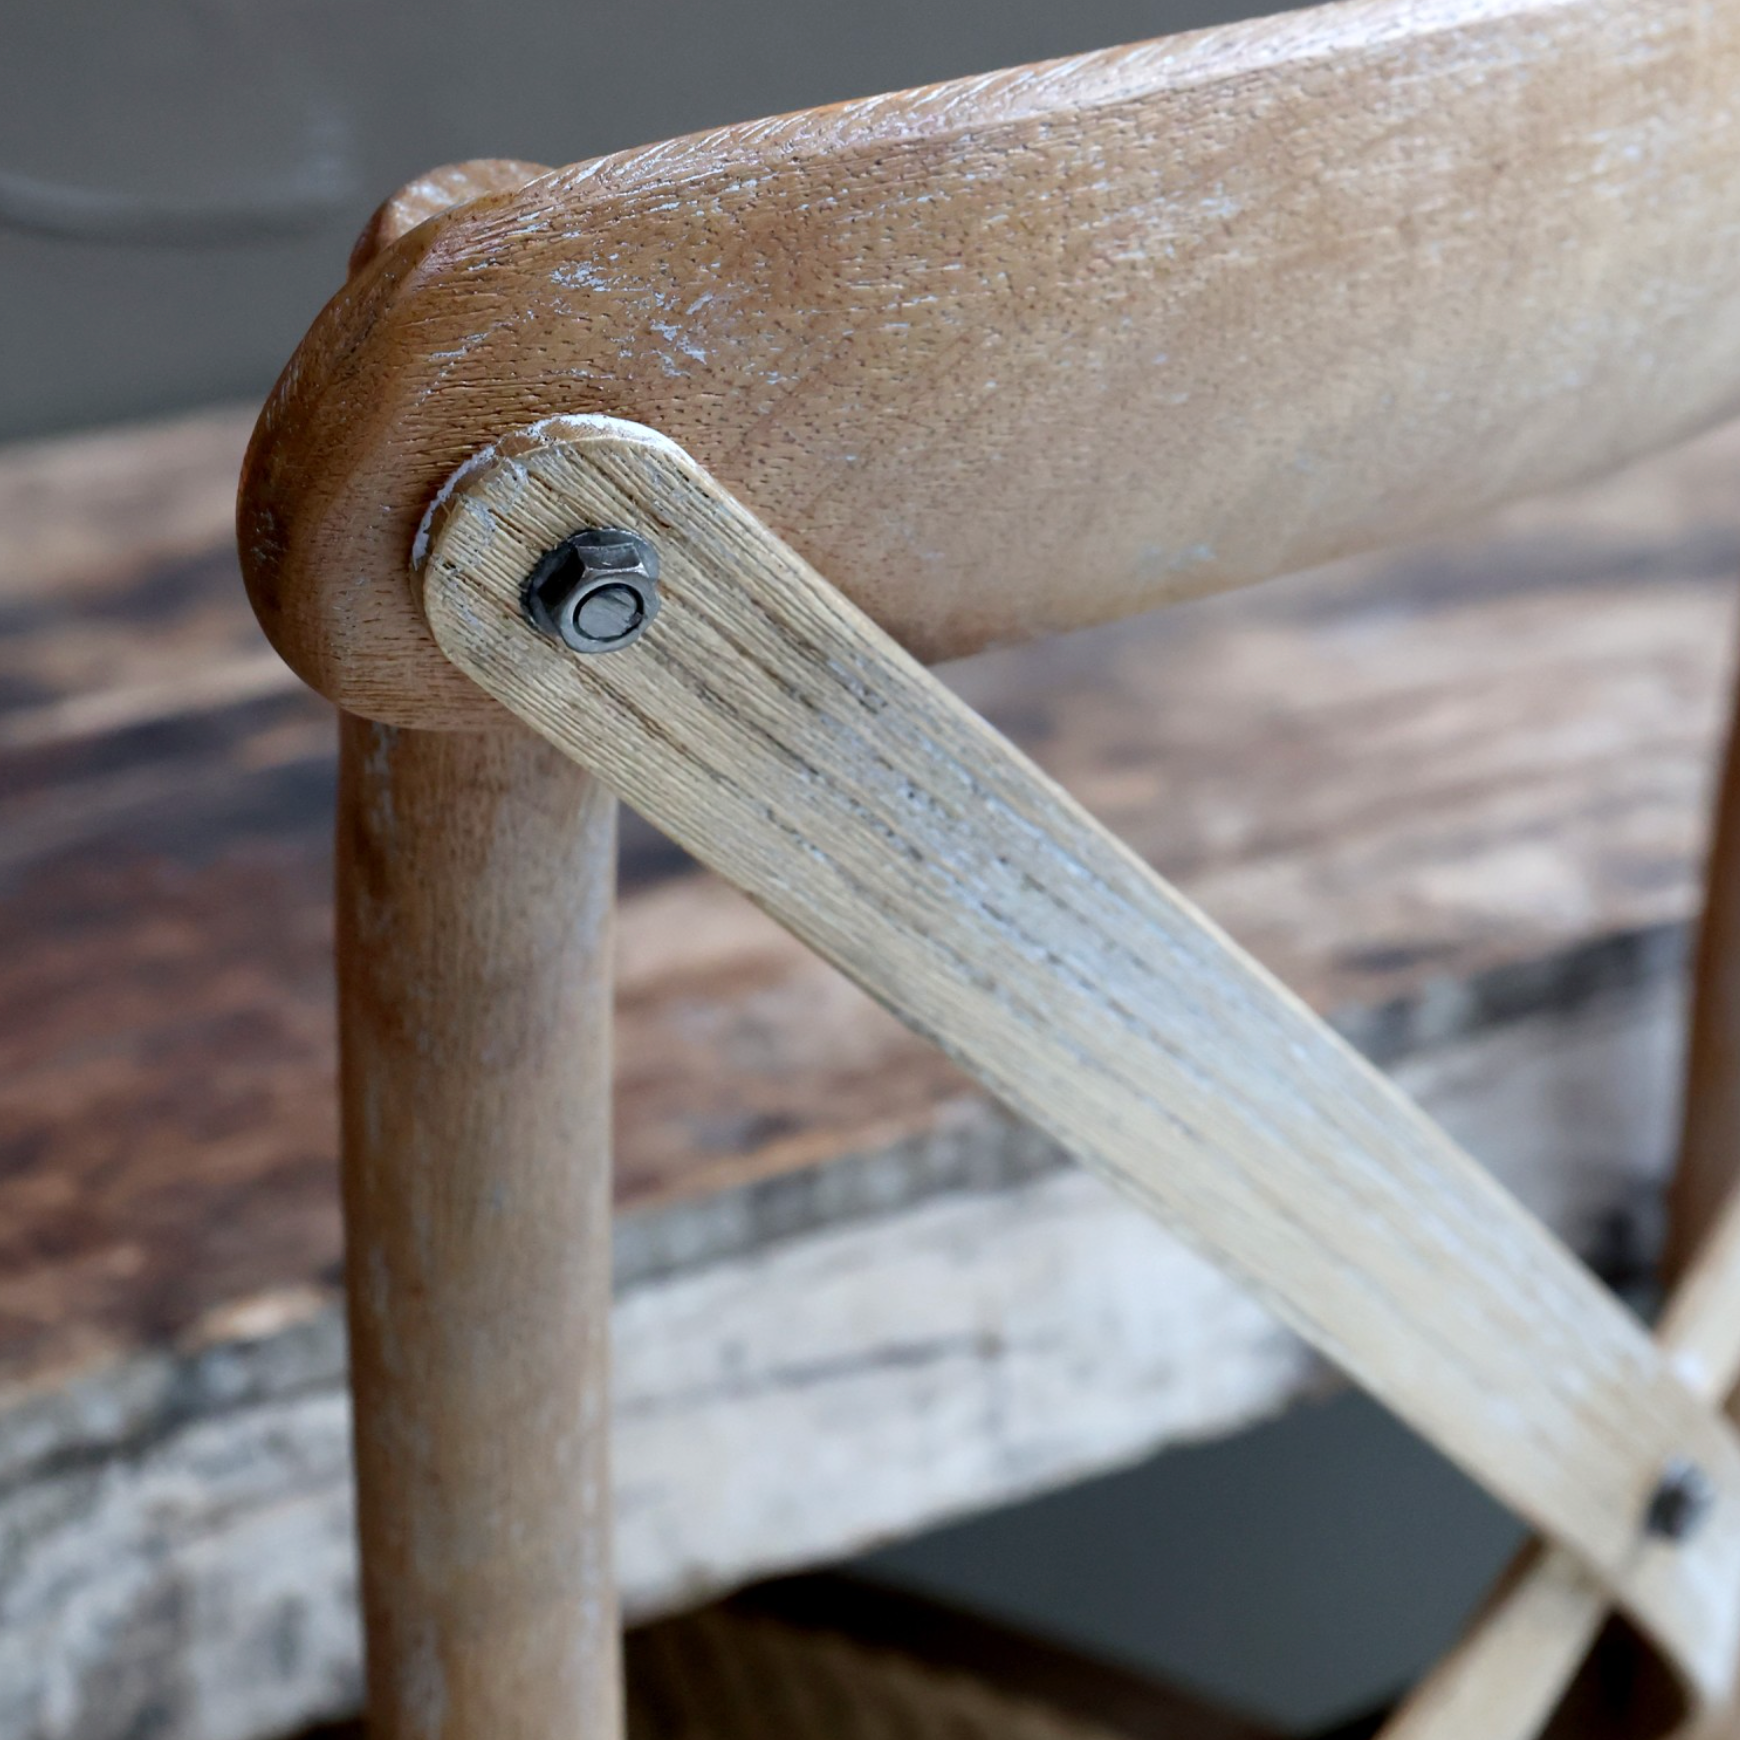 A close up image of the back of a wooden dining chair.